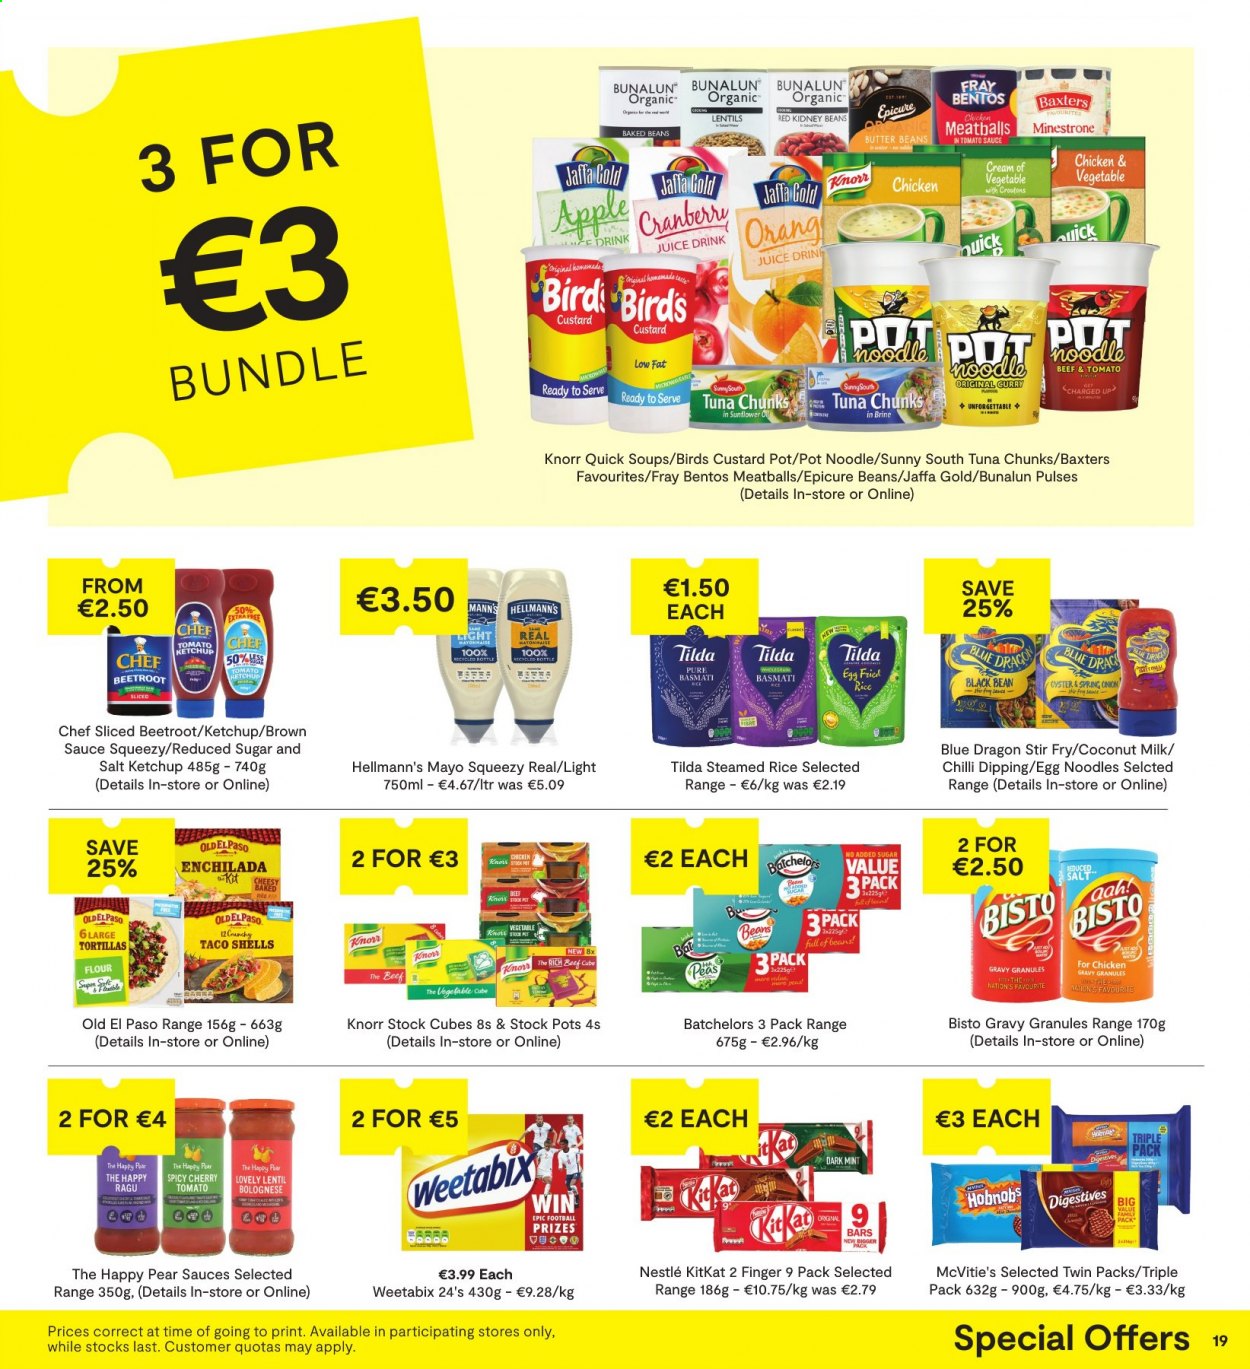 thumbnail - SuperValu offer  - 02.09.2021 - 15.09.2021 - Sales products - tortillas, Old El Paso, beans, peas, onion, green onion, beetroot, pears, tuna, oysters, enchiladas, meatballs, Knorr, noodles, custard, butter, mayonnaise, Hellmann’s, Nestlé, KitKat, coconut milk, lentils, kidney beans, baked beans, Weetabix, basmati rice, egg noodles, ketchup, chicken gravy, brown sauce, ragu, juice. Page 19.